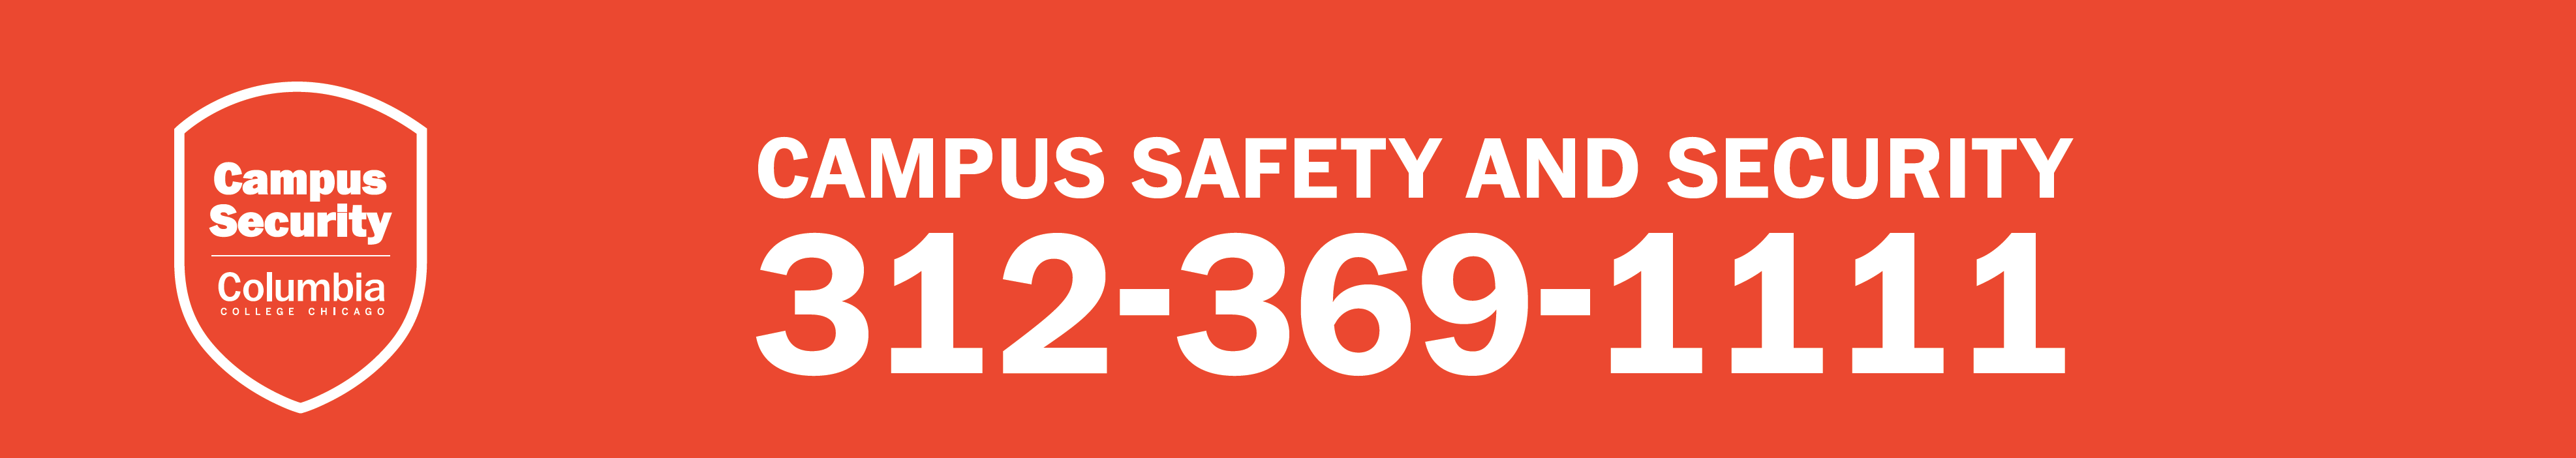 Campus Safety and Security 312-369-1111